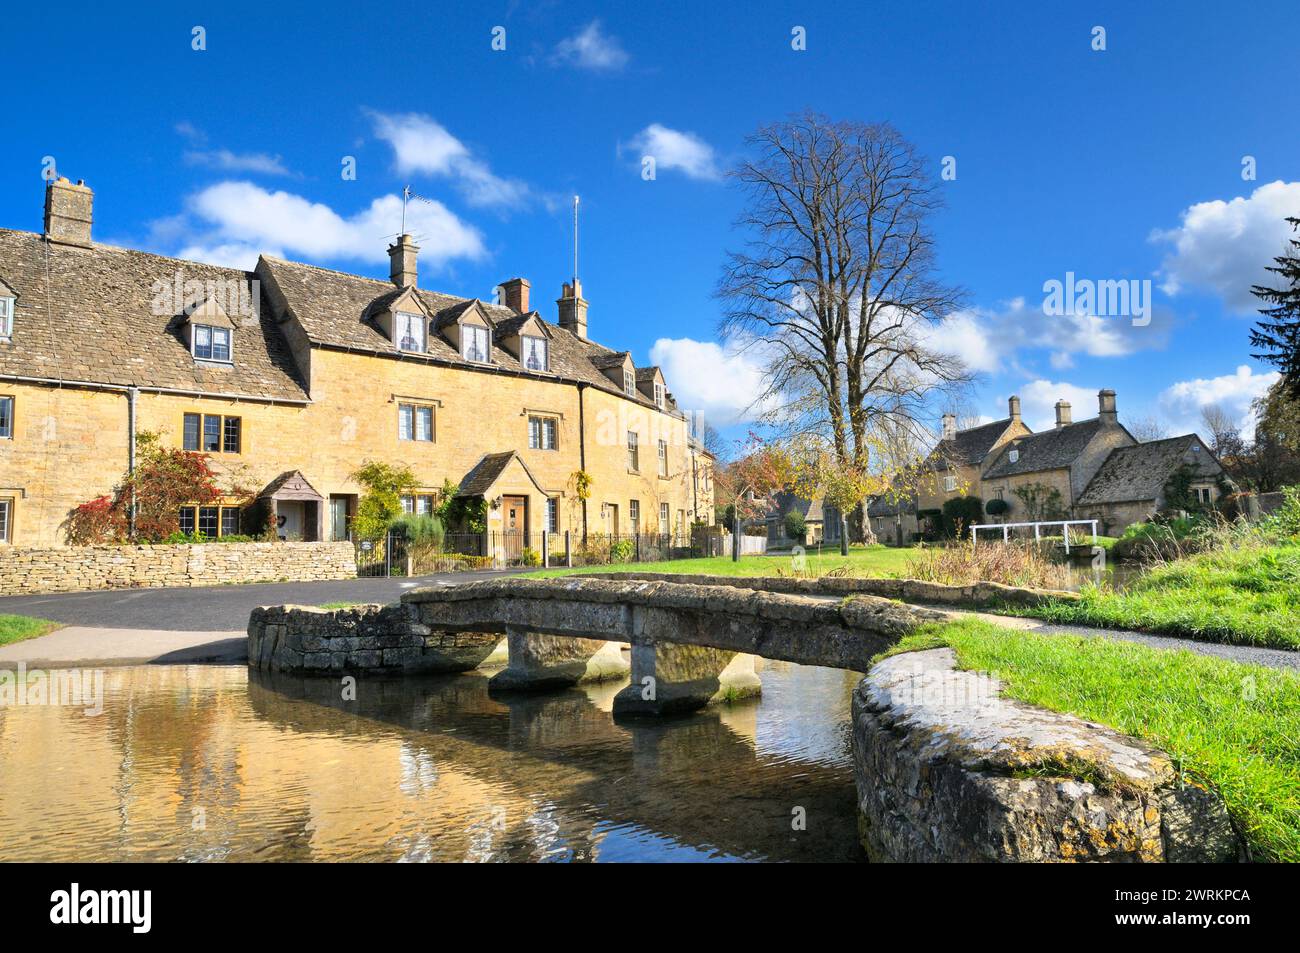 Cotswolds scene with traditional cottages and stone bridge over River Eye in picturesque Cotswold village Lower Slaughter, Gloucestershire, England UK Stock Photo